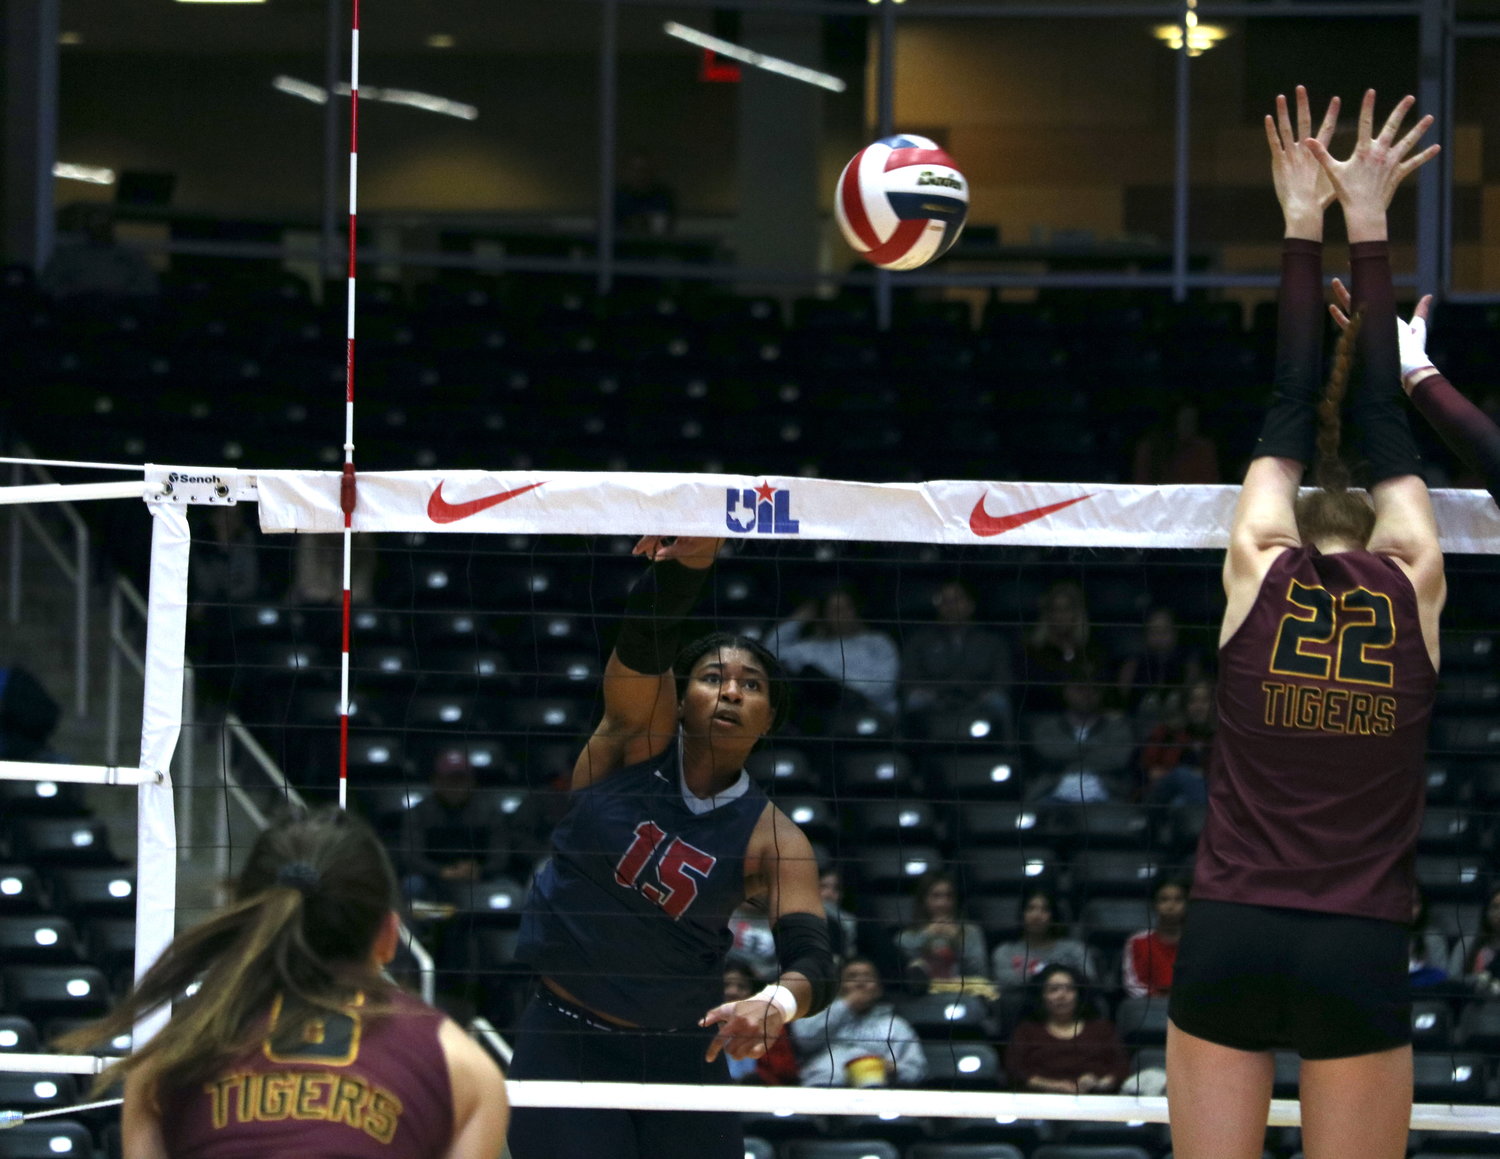 Tendai Titley spikes the ball during Saturday's state final between Tompkins and Dripping Springs at the Curtis Culwell Center in Garland.